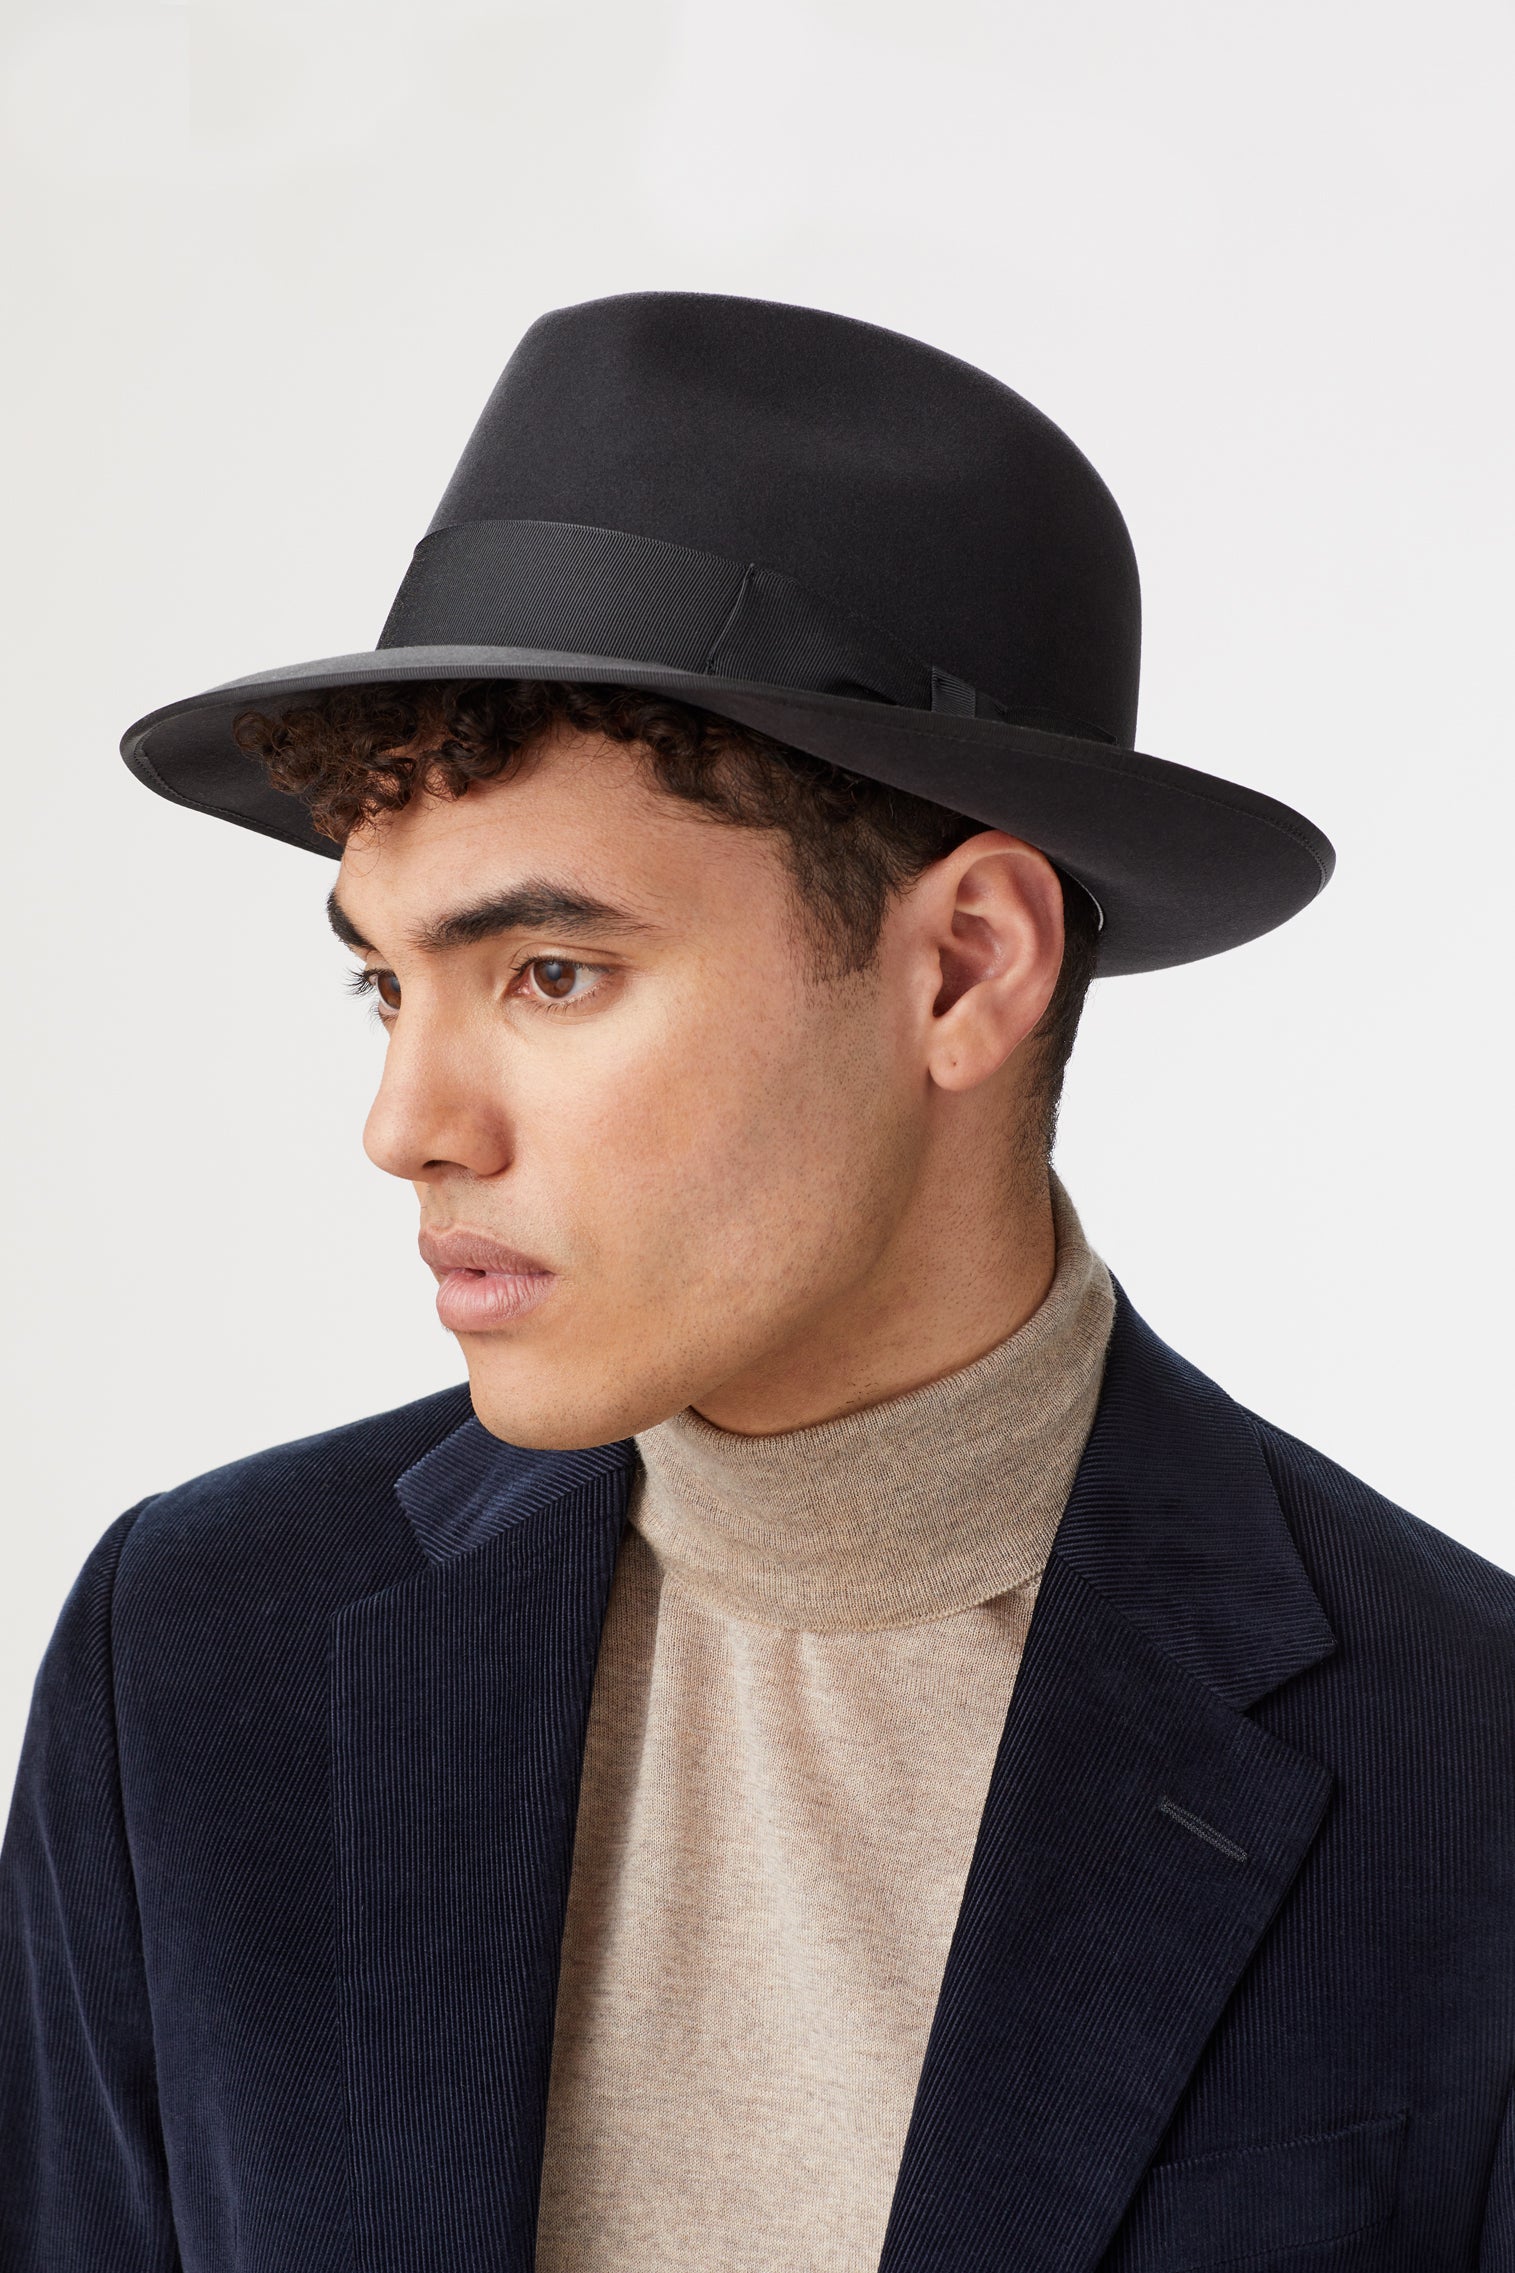 Escorial Wool Albany Trilby - Products - Lock & Co. Hatters London UK